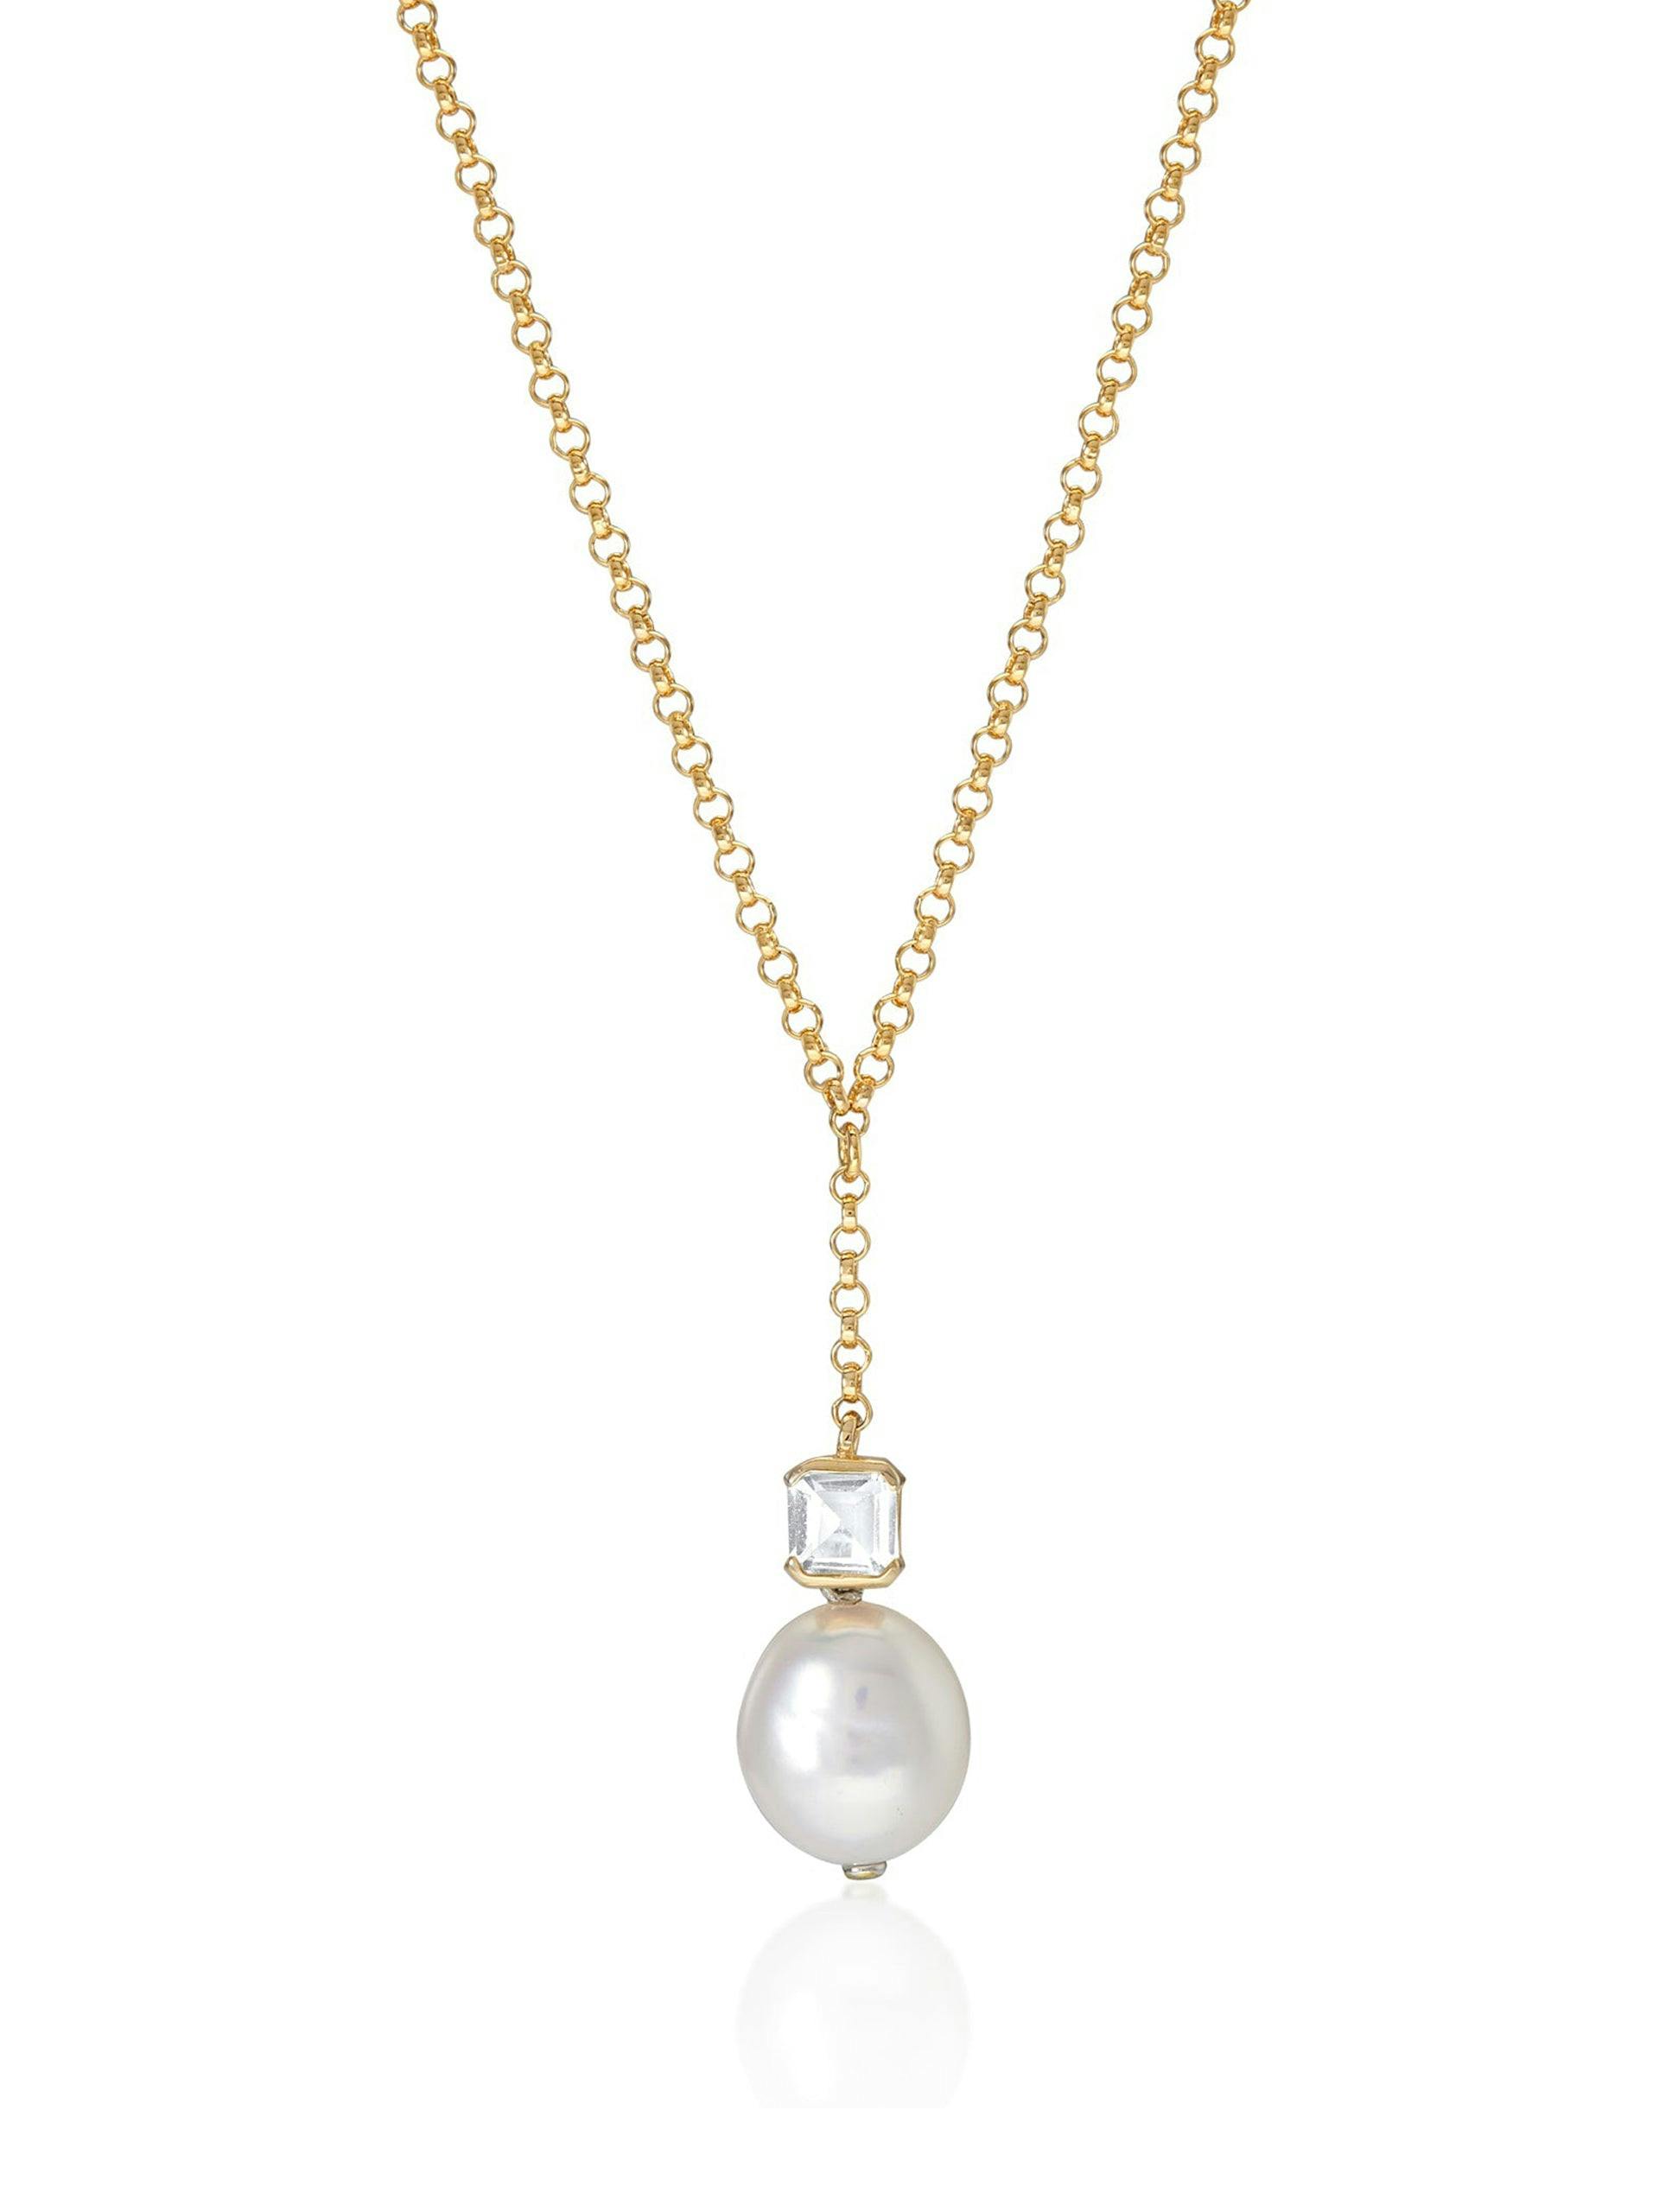 Bella baroque pearl necklace in gold and white topaz